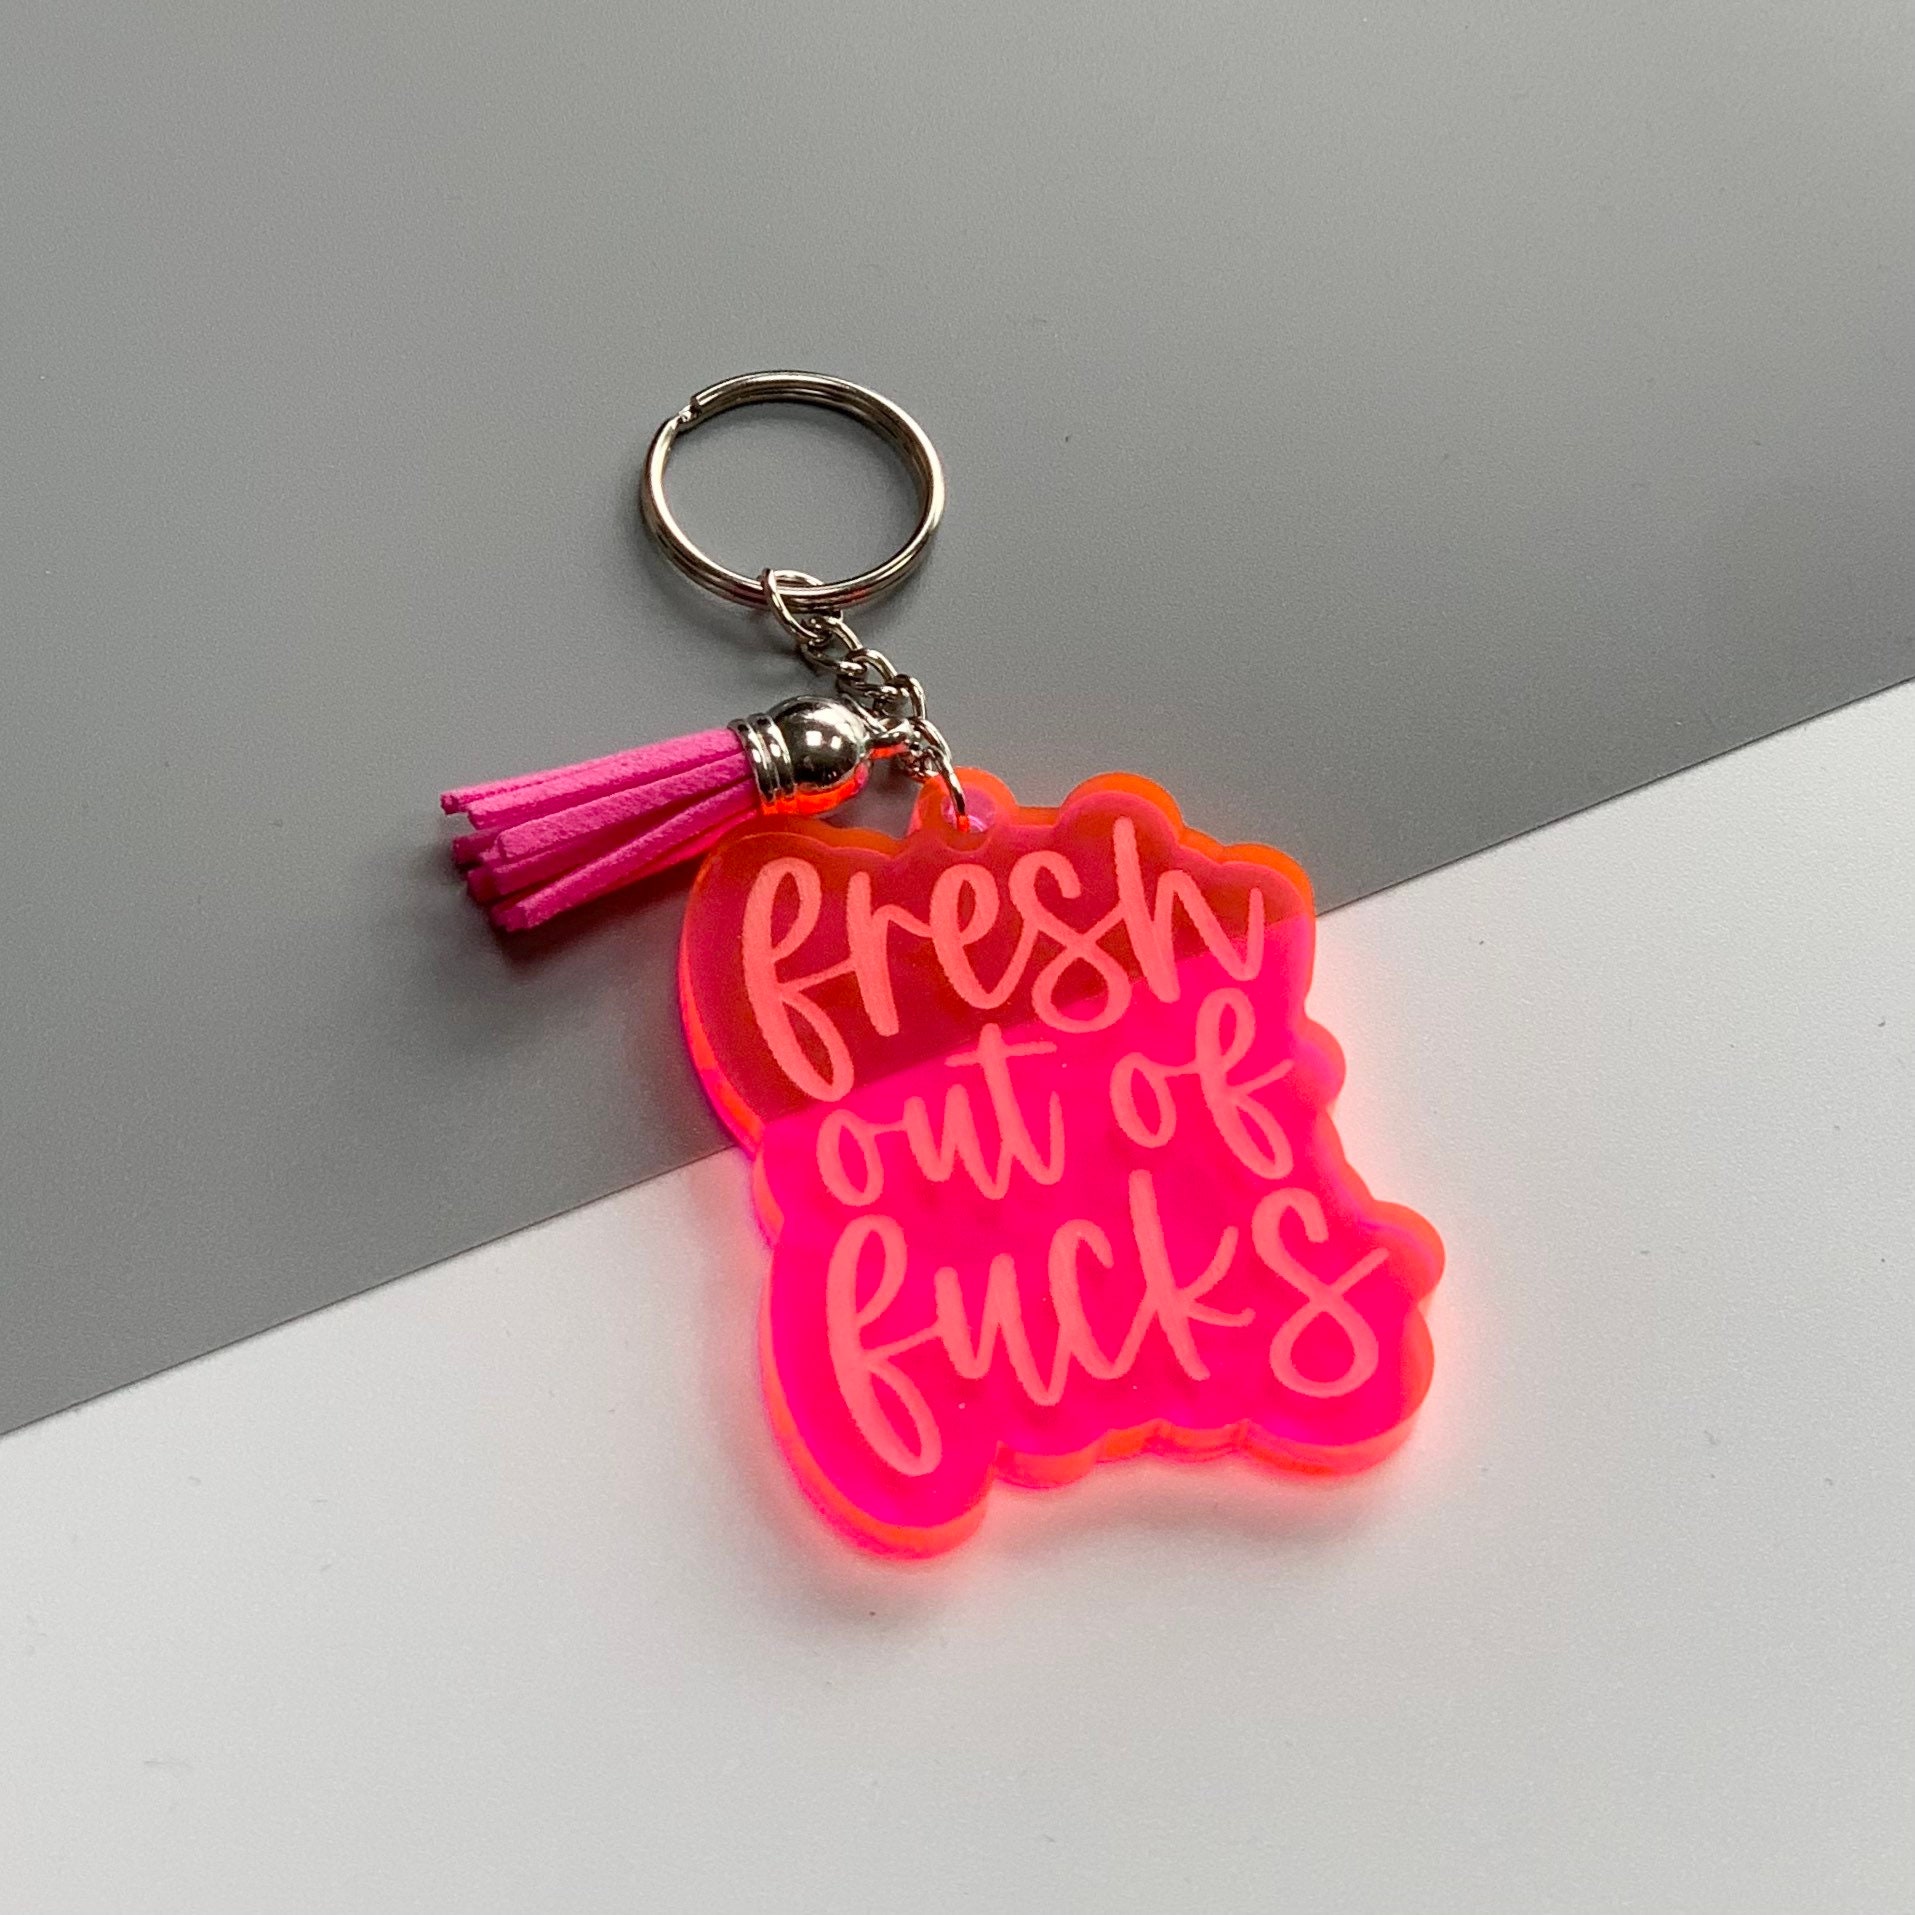 Newest Fresh Outta F**ks Pad and Pen,Snarky Novelty Fresh Outta F**ks Pen  Set US